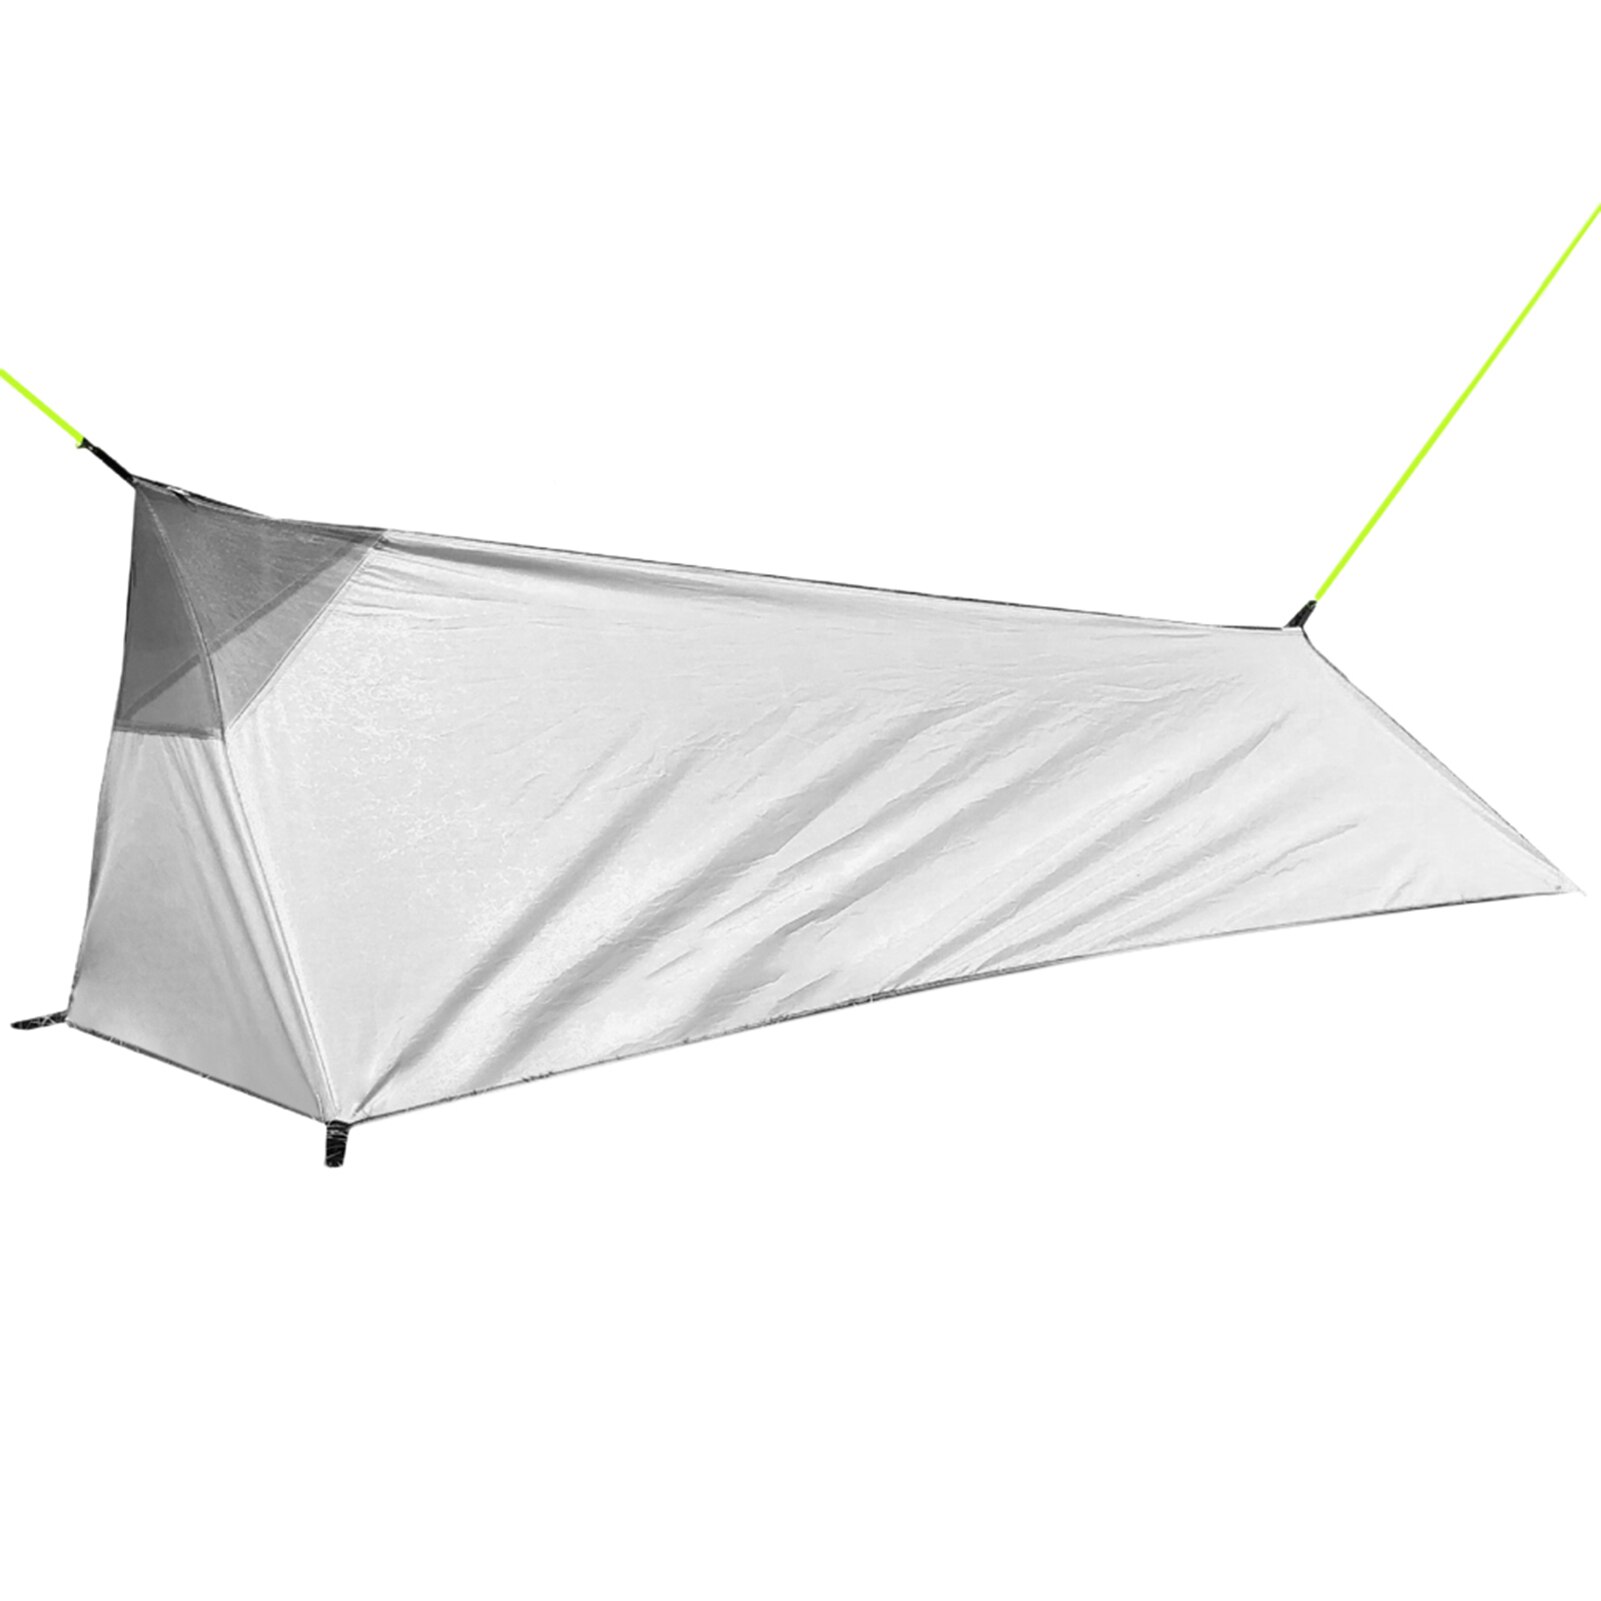 A Tower Ultralight Tent 1 Person Camping Tent Portable Canopy Hiking Mountaining Backpacking Waterproof Single Tent: White